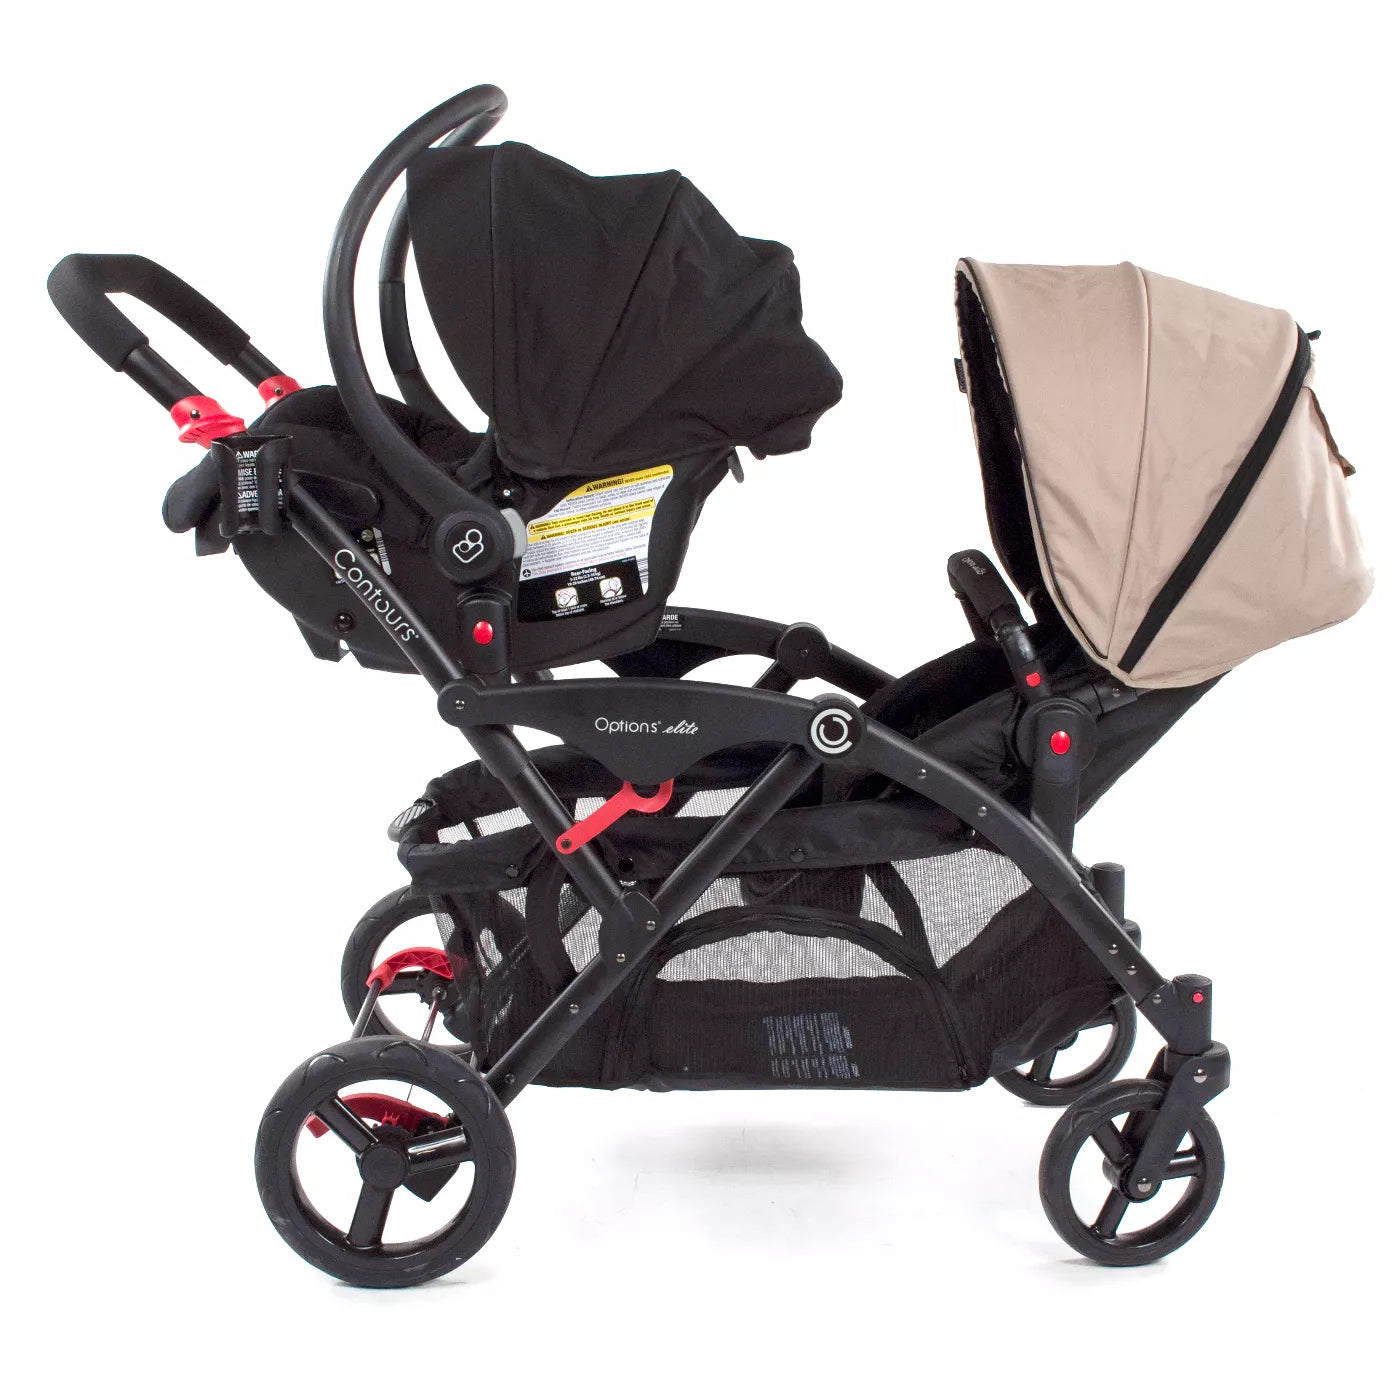 Contours Maxi-Cosi/Nuna/Cybex Car Seat Adapter Accessory for use on Contours Strollers